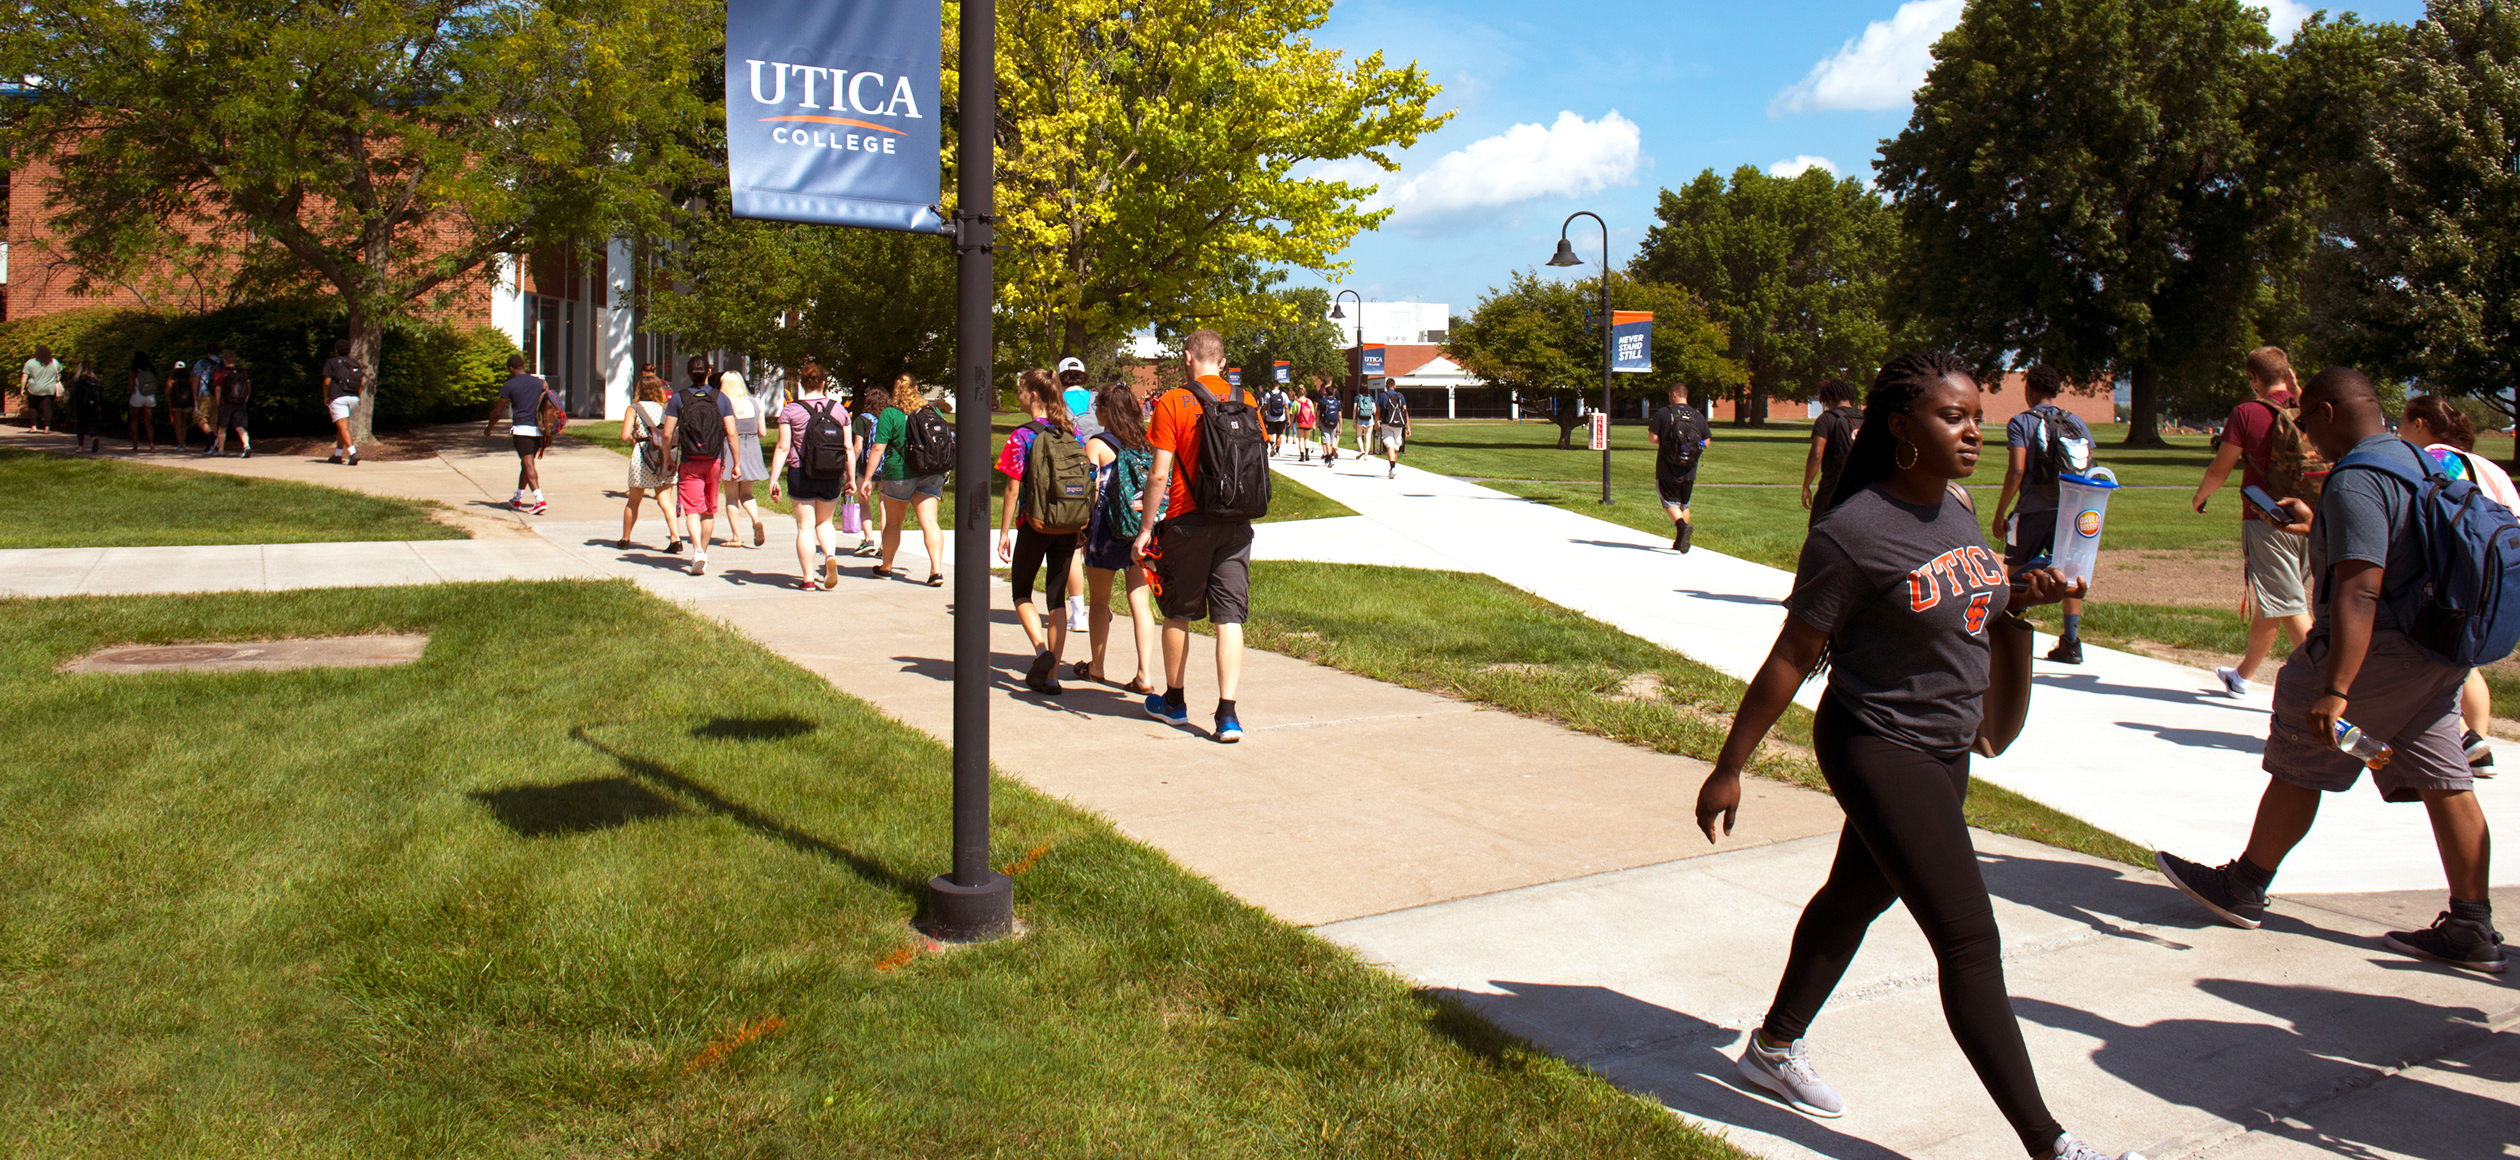 The Applied Ethics Institute at Utica University - Ethics & Public Policy Newsletter - May 2018